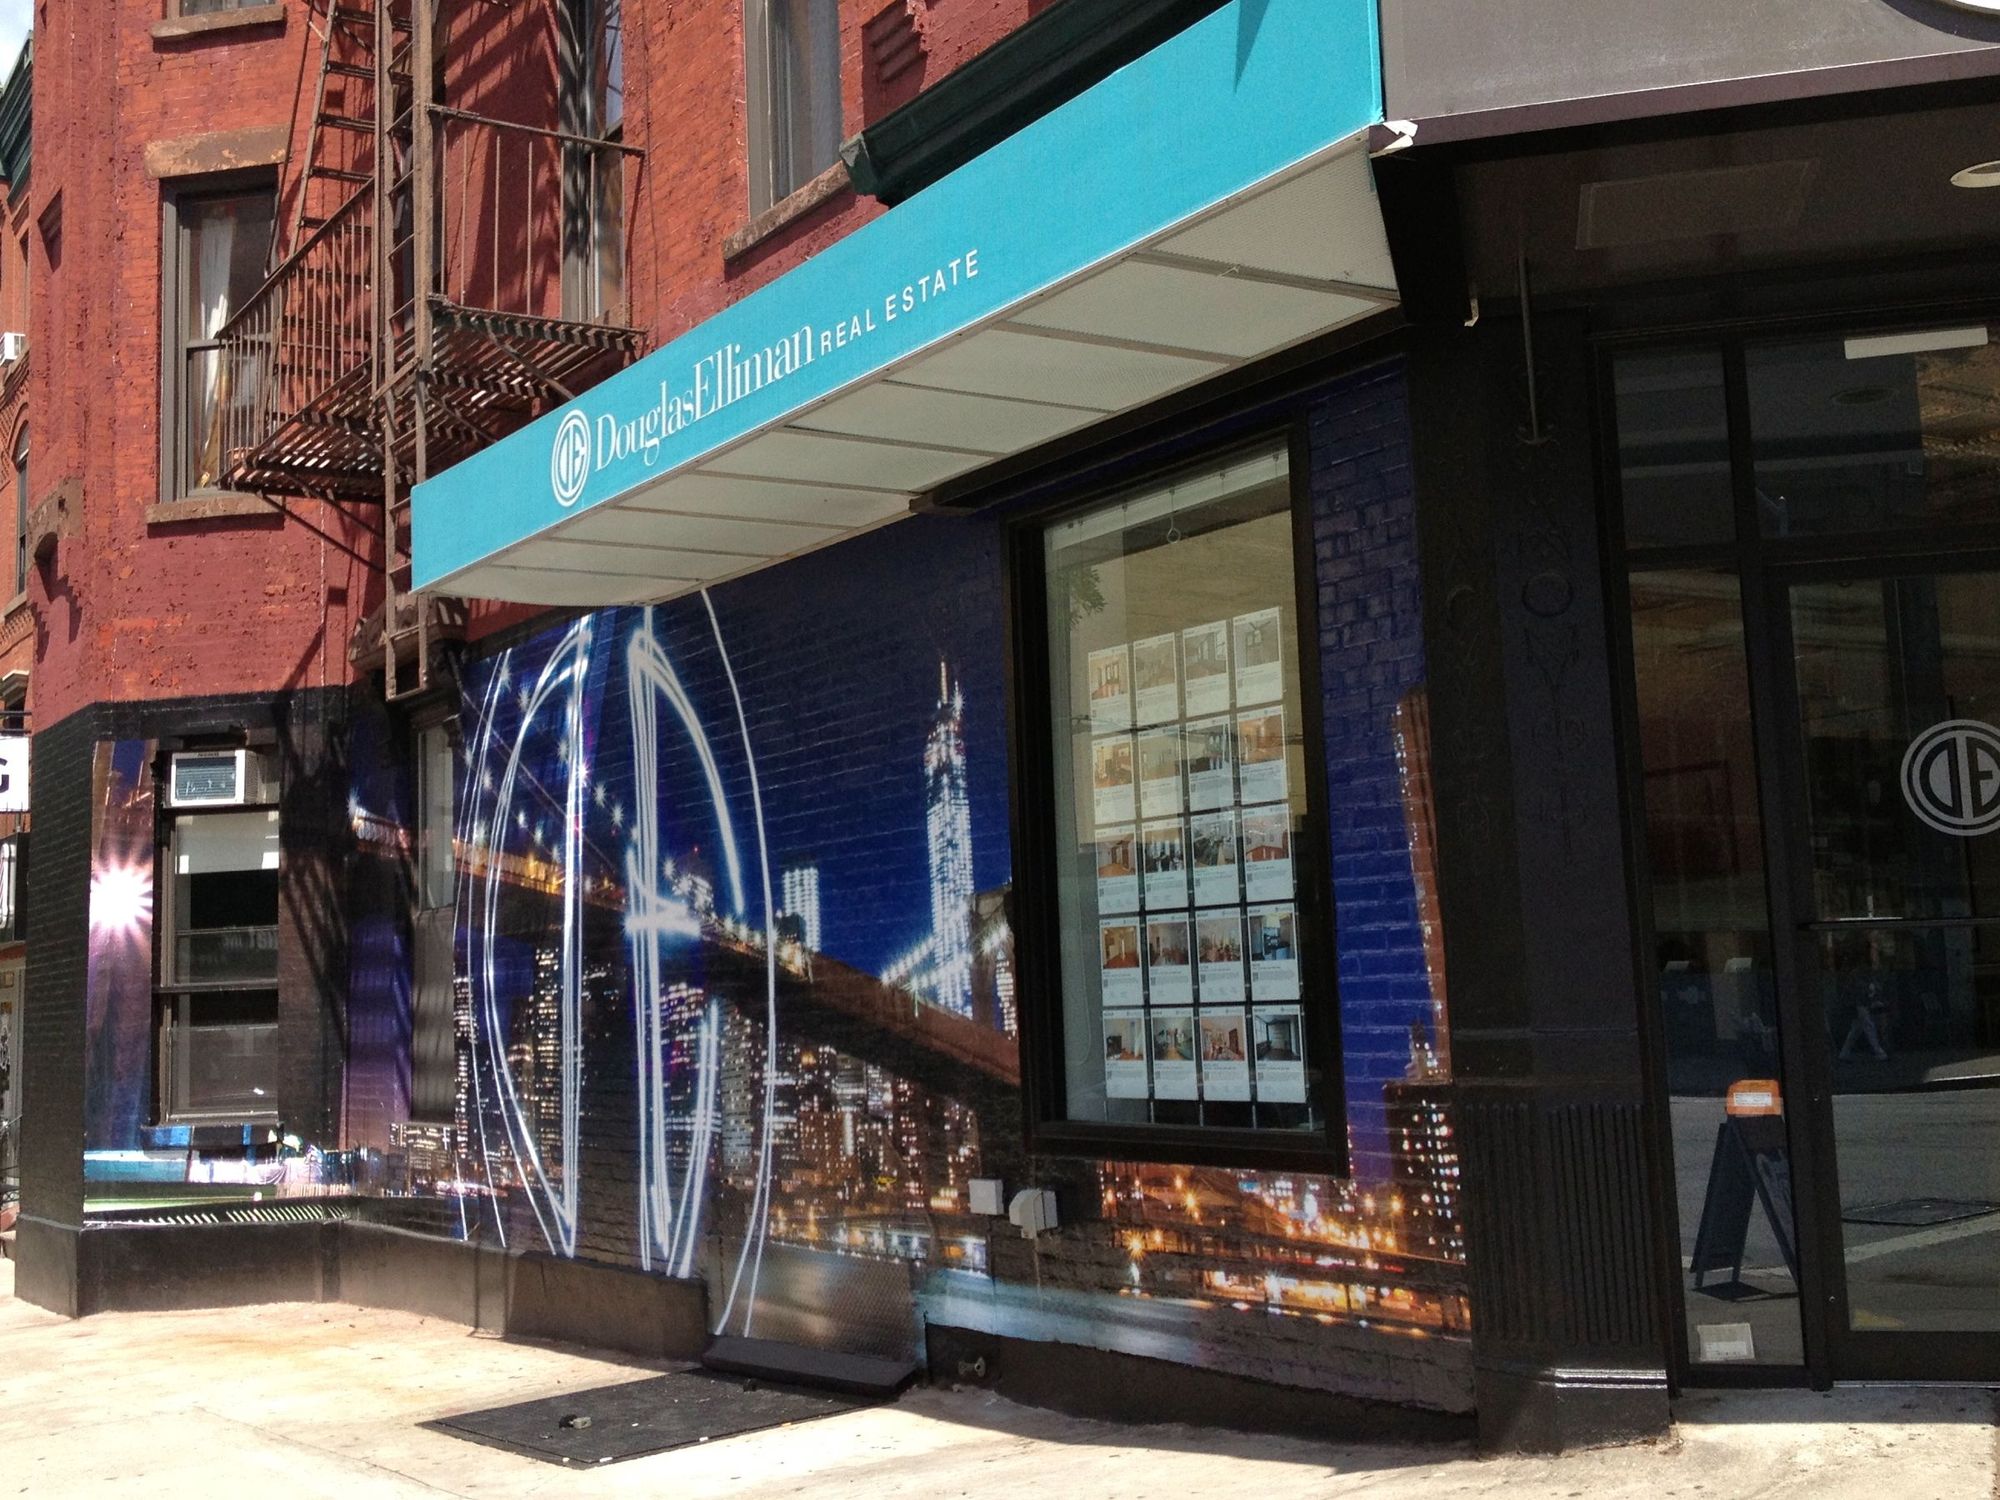 What Do You Think About The New Mural Outside Douglas Elliman?